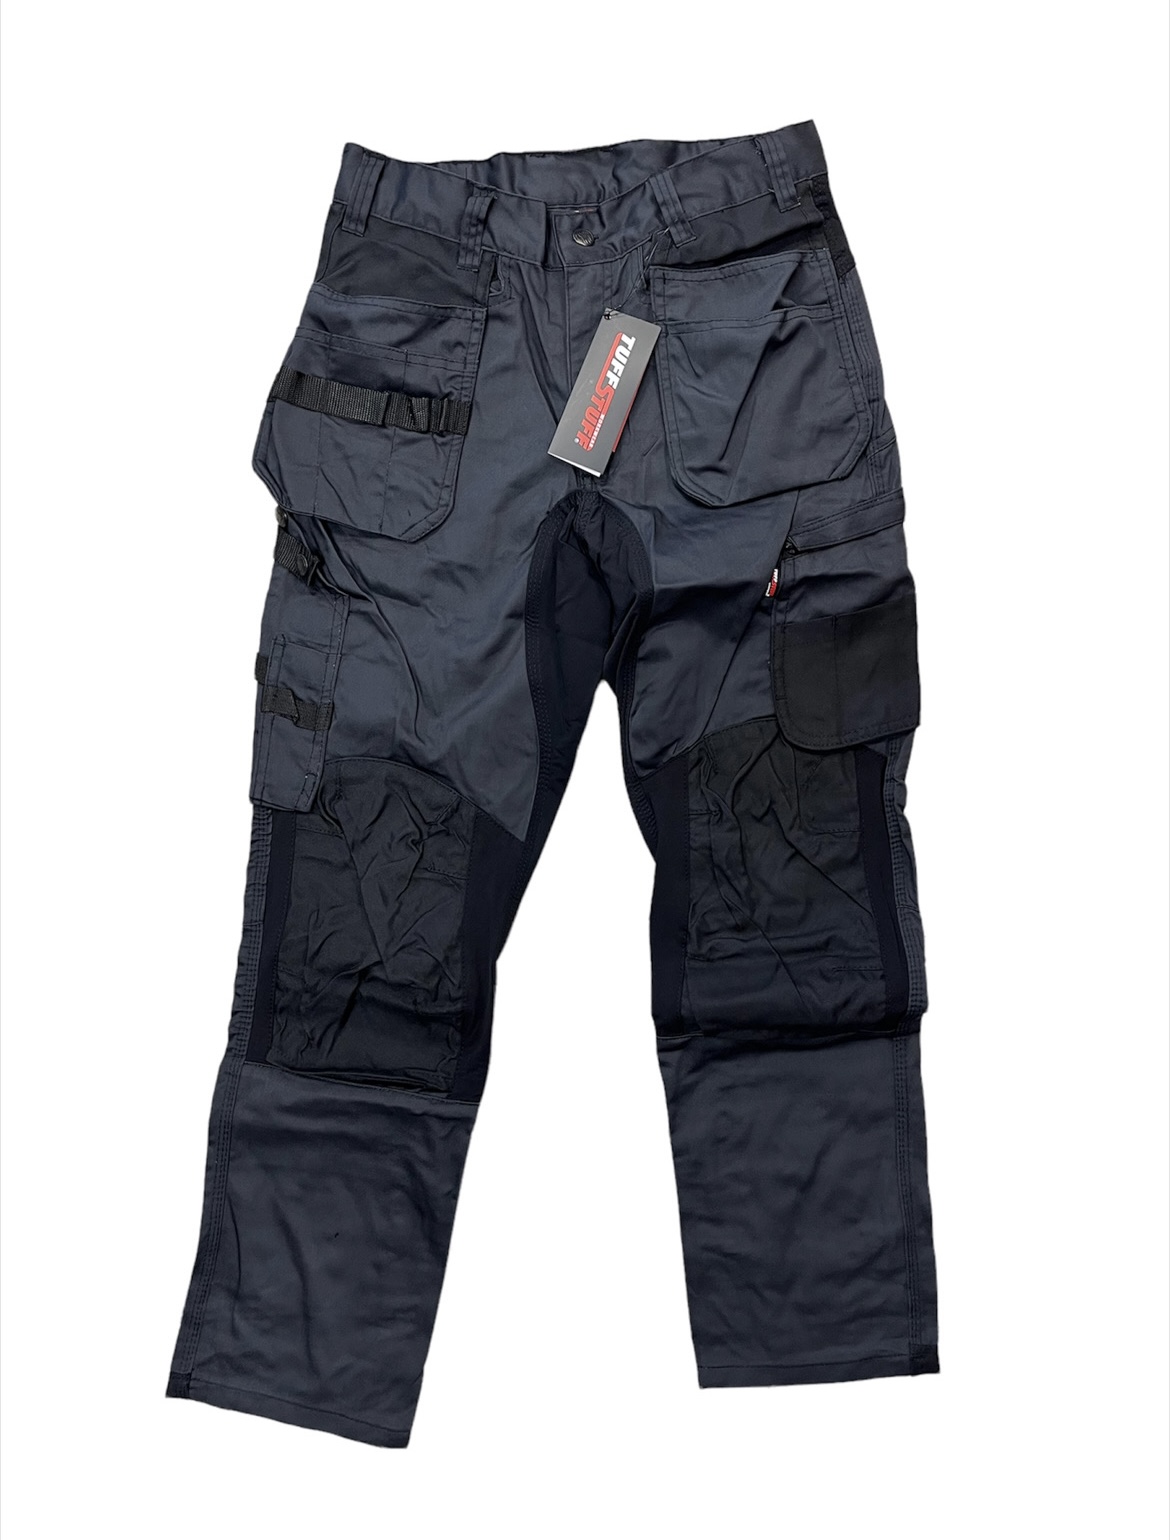 TUFF STUFF X-MOTION WORK TROUSERS - Murray Excel